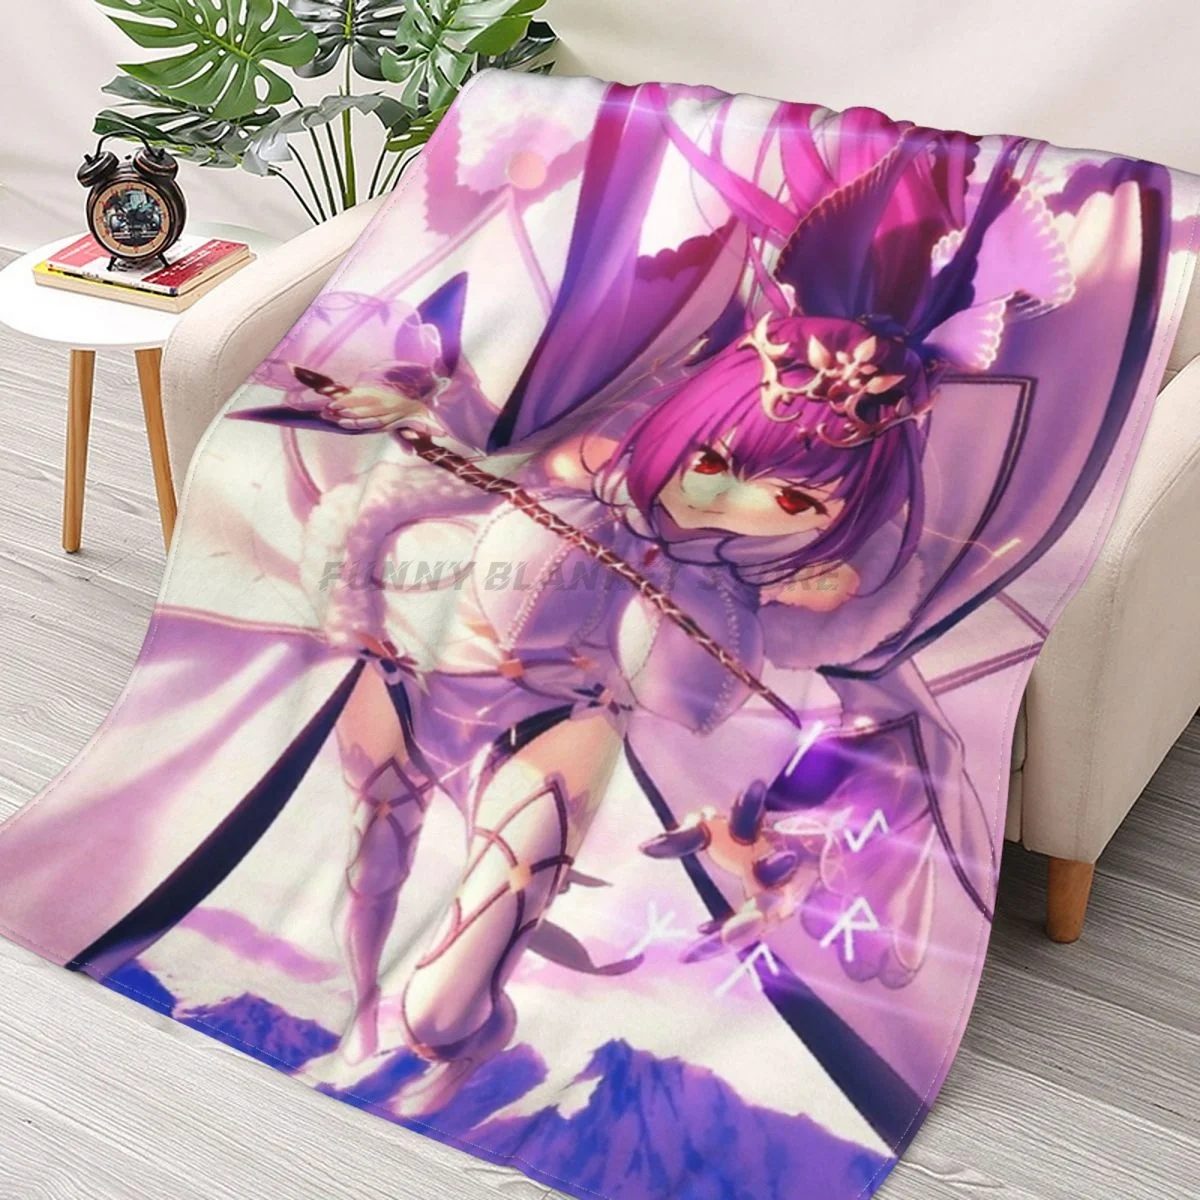 

Fate Grand Order (FGO) - Scathach-Skadi Throws Blankets Collage Flannel Ultra-Soft Warm picnic blanket bedspread on the bed